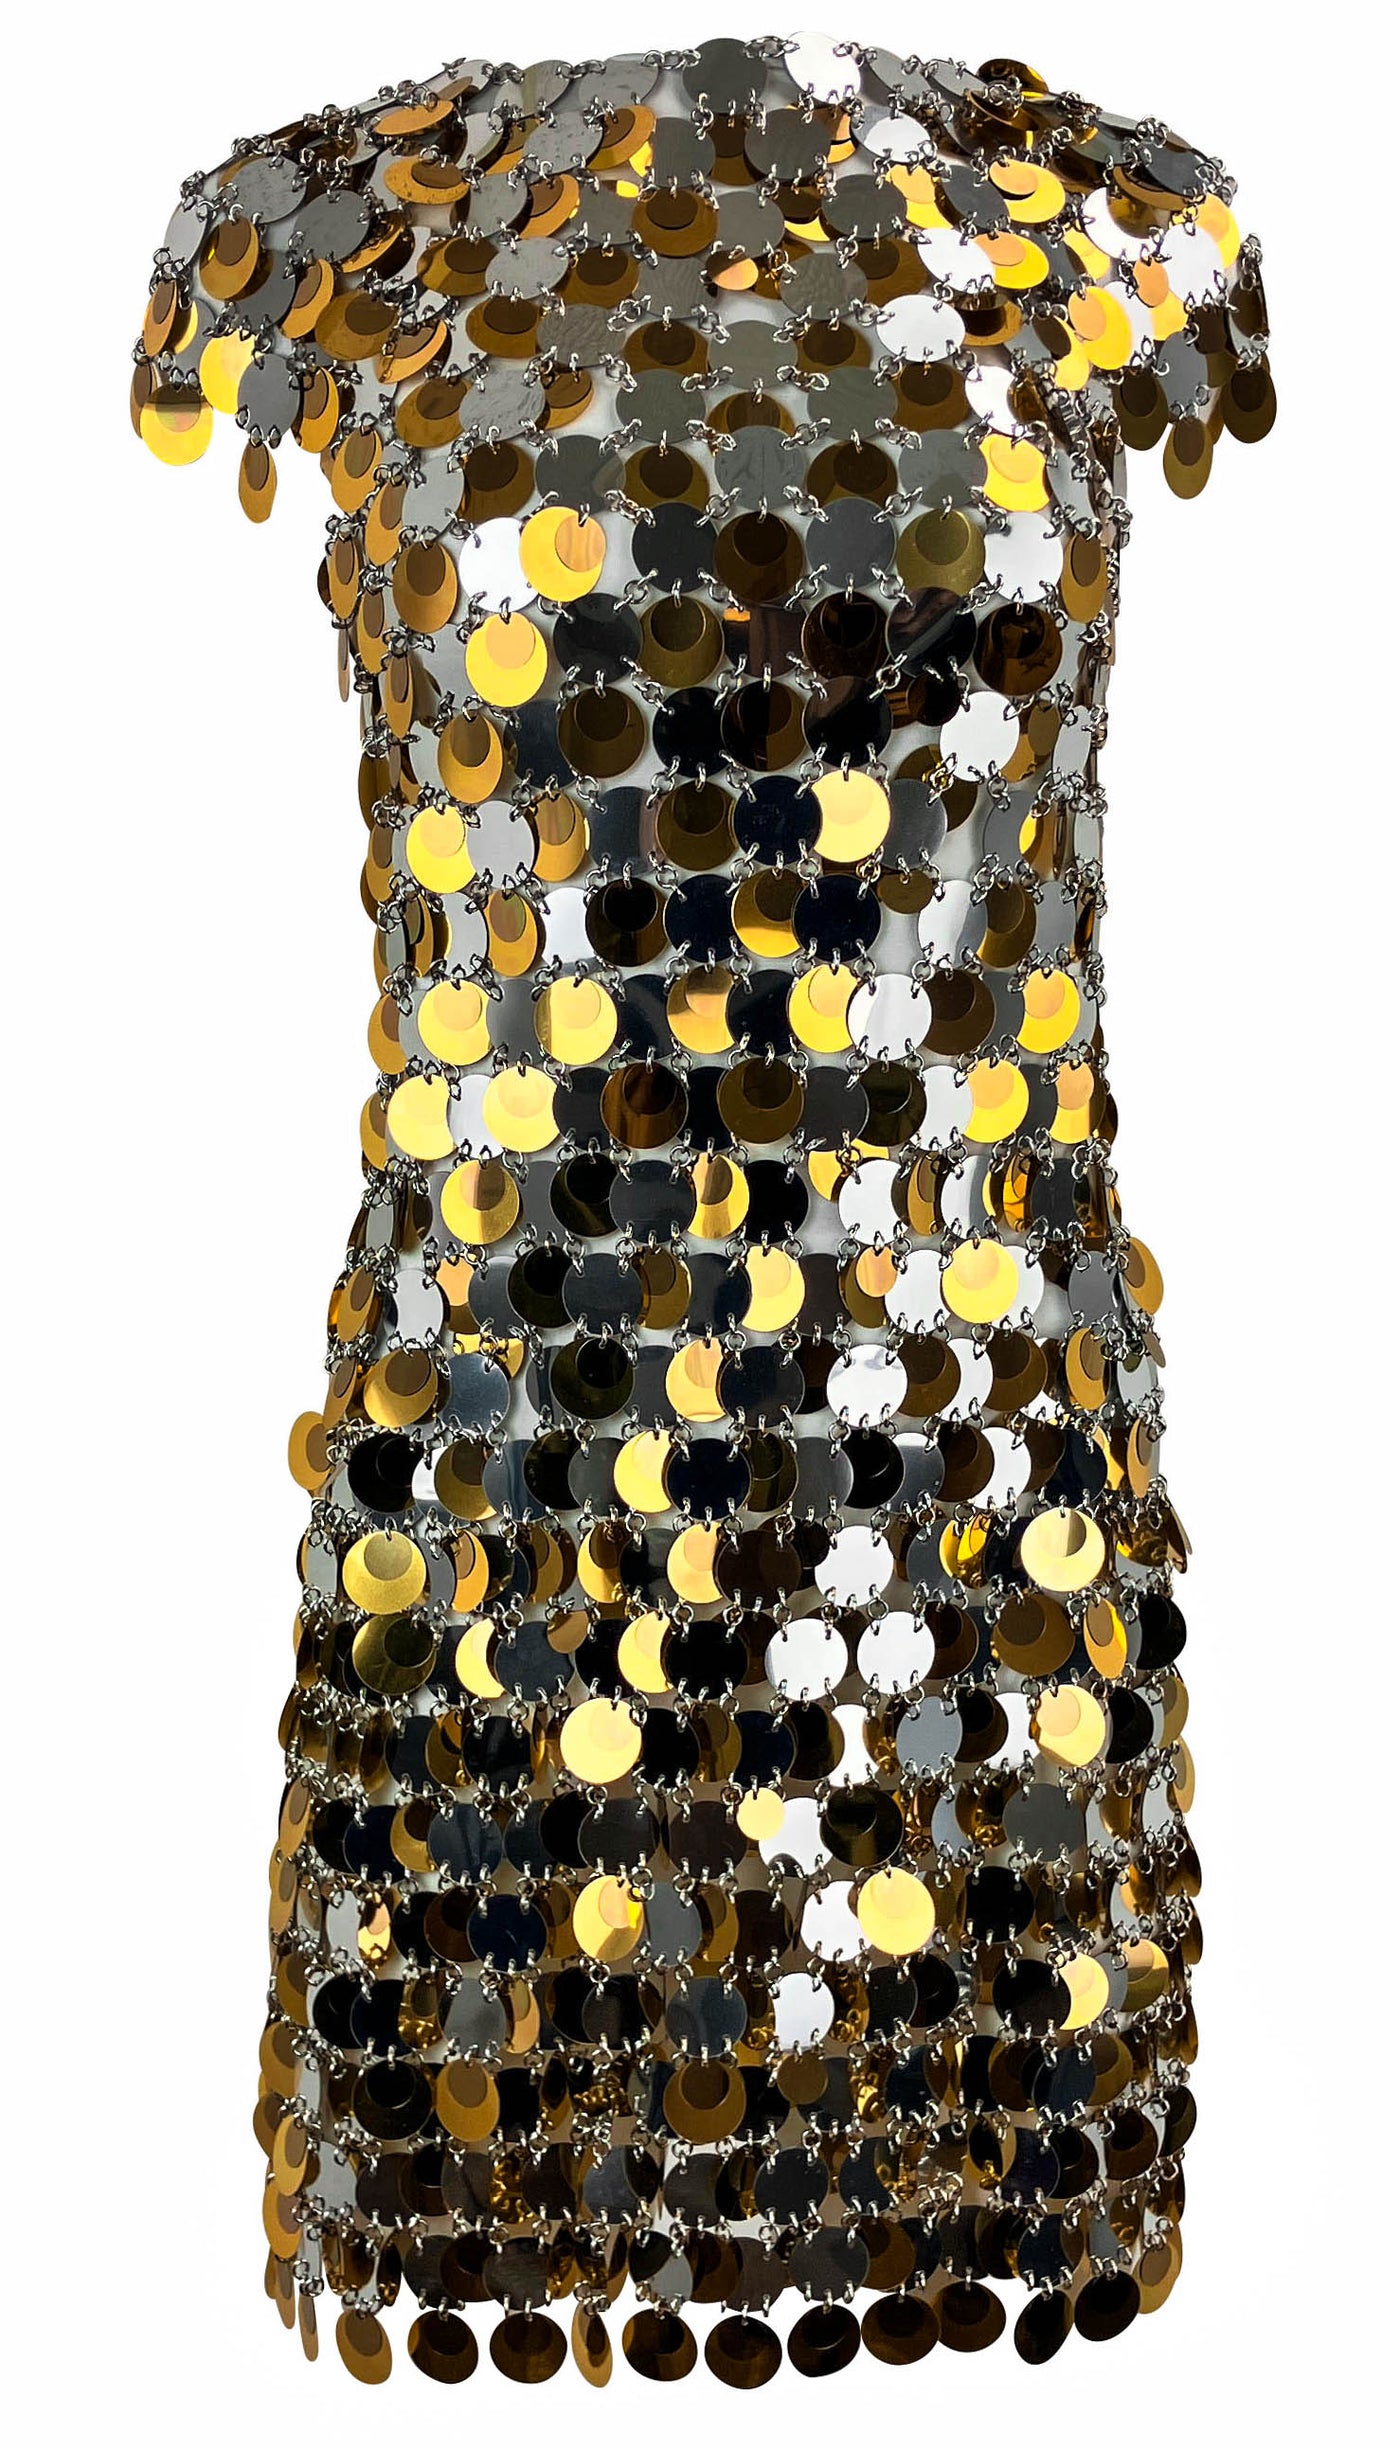 Paco Rabanne Circle Disc Mini Dress in Silver/Gold - Discounts on Paco Rabanne at UAL